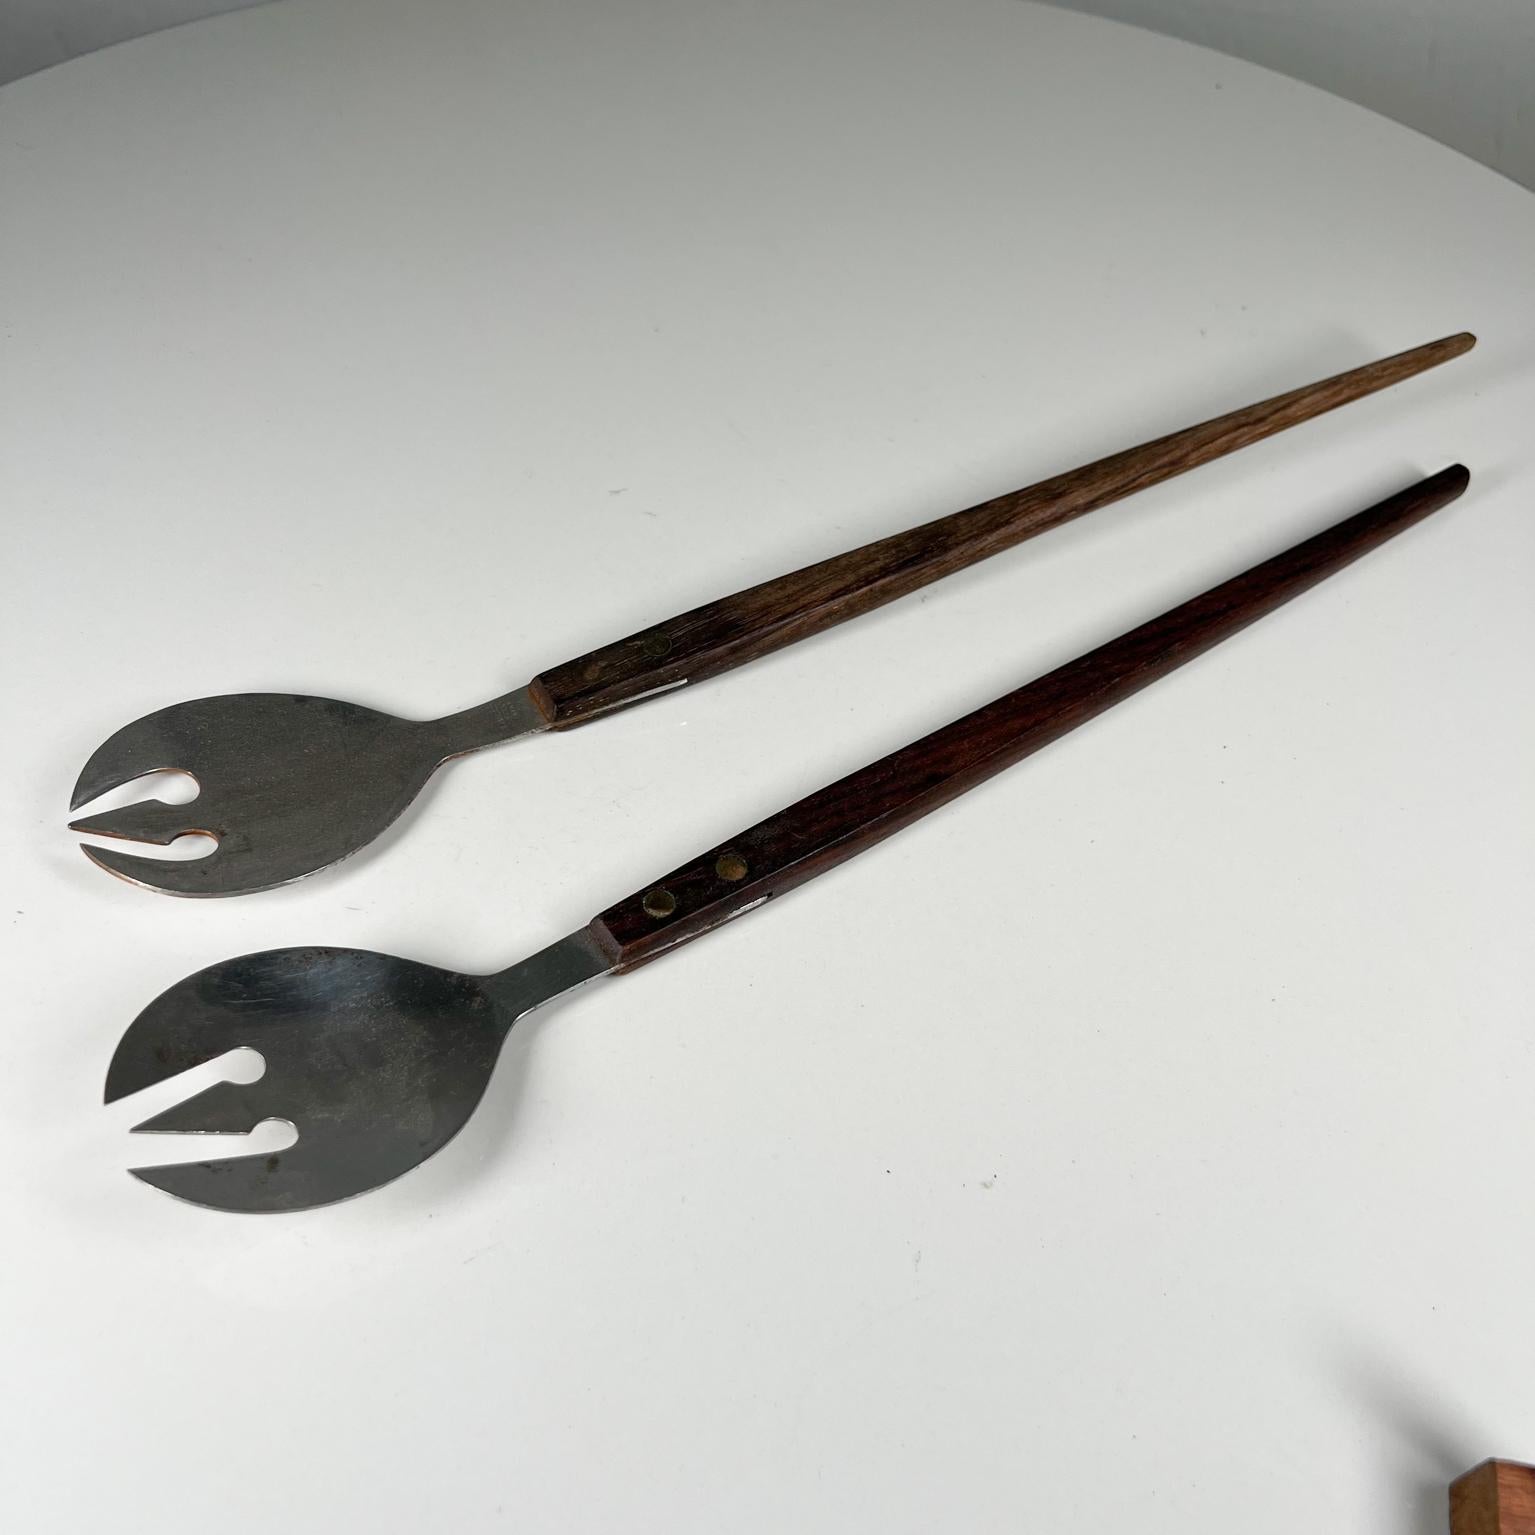 Japanese Mid-Century Modern salad serving set utensils
Stainless Steel Wood
Stamped
12.88 x 2 x .5
Original vintage condition unrestored
See images provided.